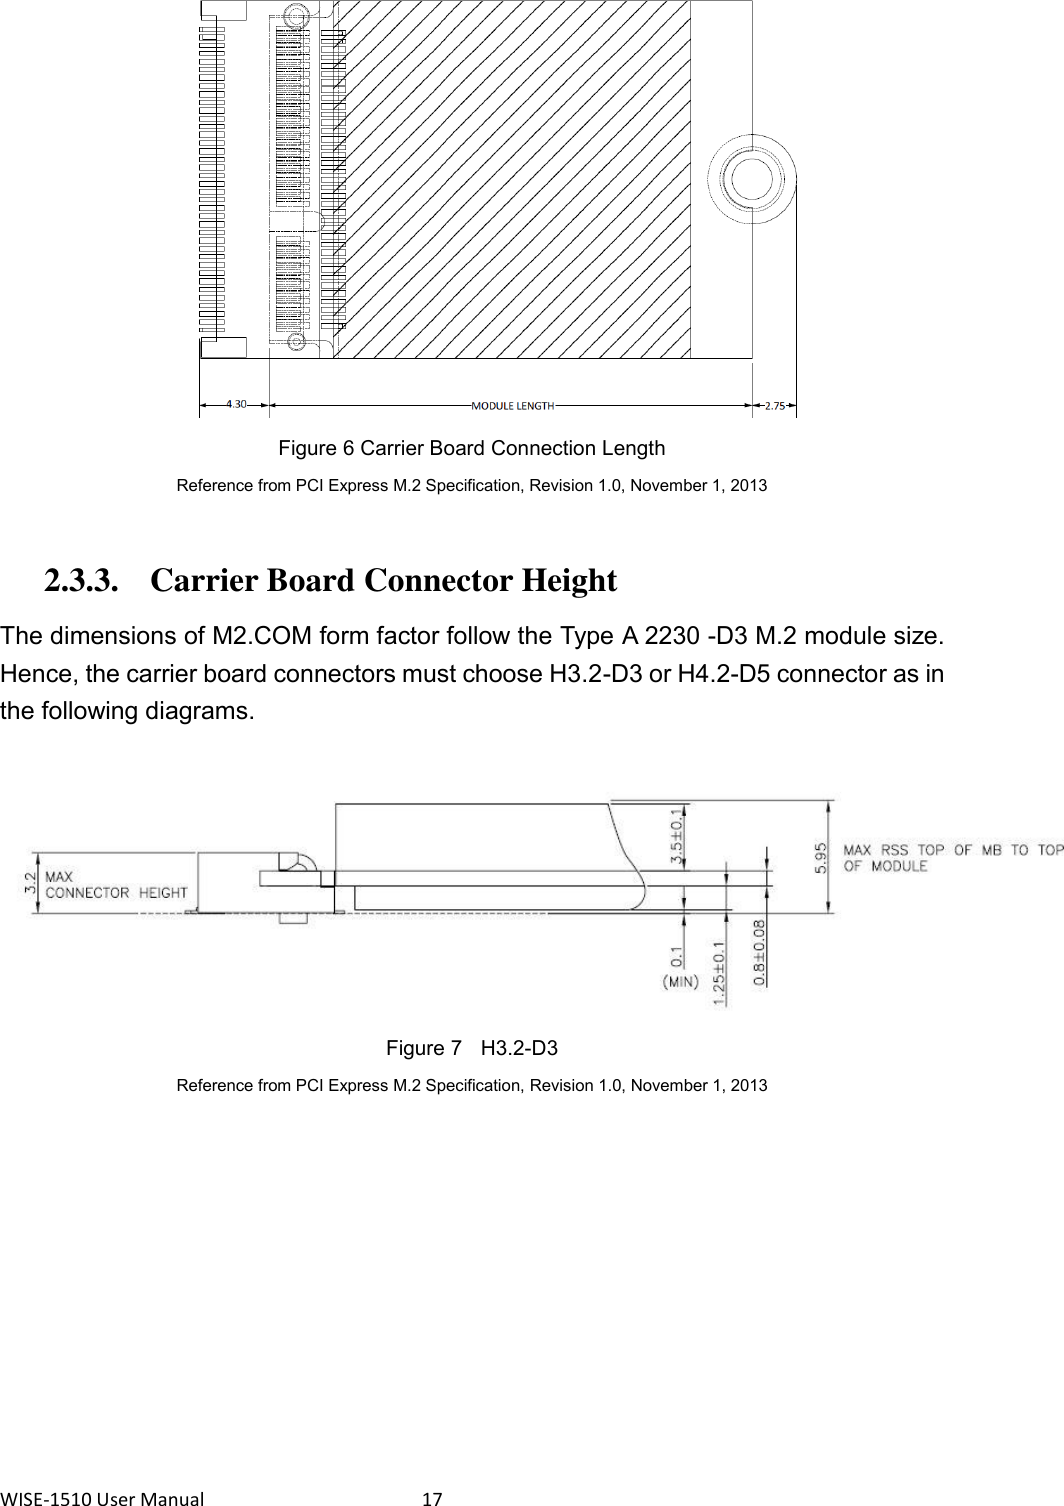 WISE-1510 User Manual  17  Figure 6 Carrier Board Connection Length Reference from PCI Express M.2 Specification, Revision 1.0, November 1, 2013  2.3.3. Carrier Board Connector Height The dimensions of M2.COM form factor follow the Type A 2230 -D3 M.2 module size. Hence, the carrier board connectors must choose H3.2-D3 or H4.2-D5 connector as in the following diagrams.   Figure 7  H3.2-D3 Reference from PCI Express M.2 Specification, Revision 1.0, November 1, 2013   